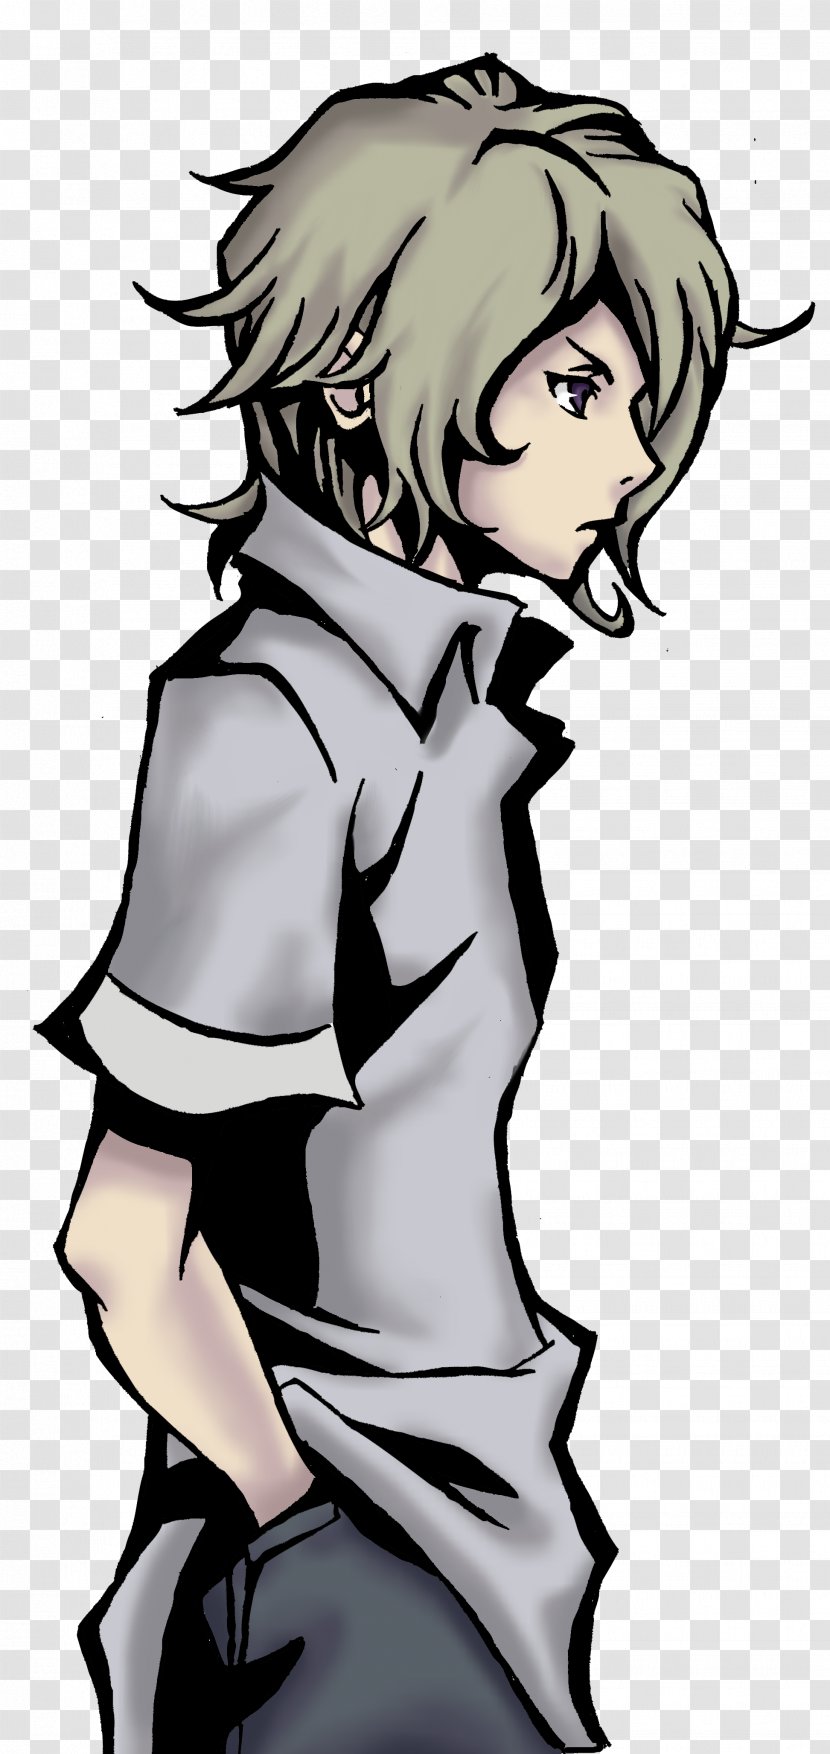 The World Ends With You DeviantArt Fan Art - Flower - Watercolor Transparent PNG